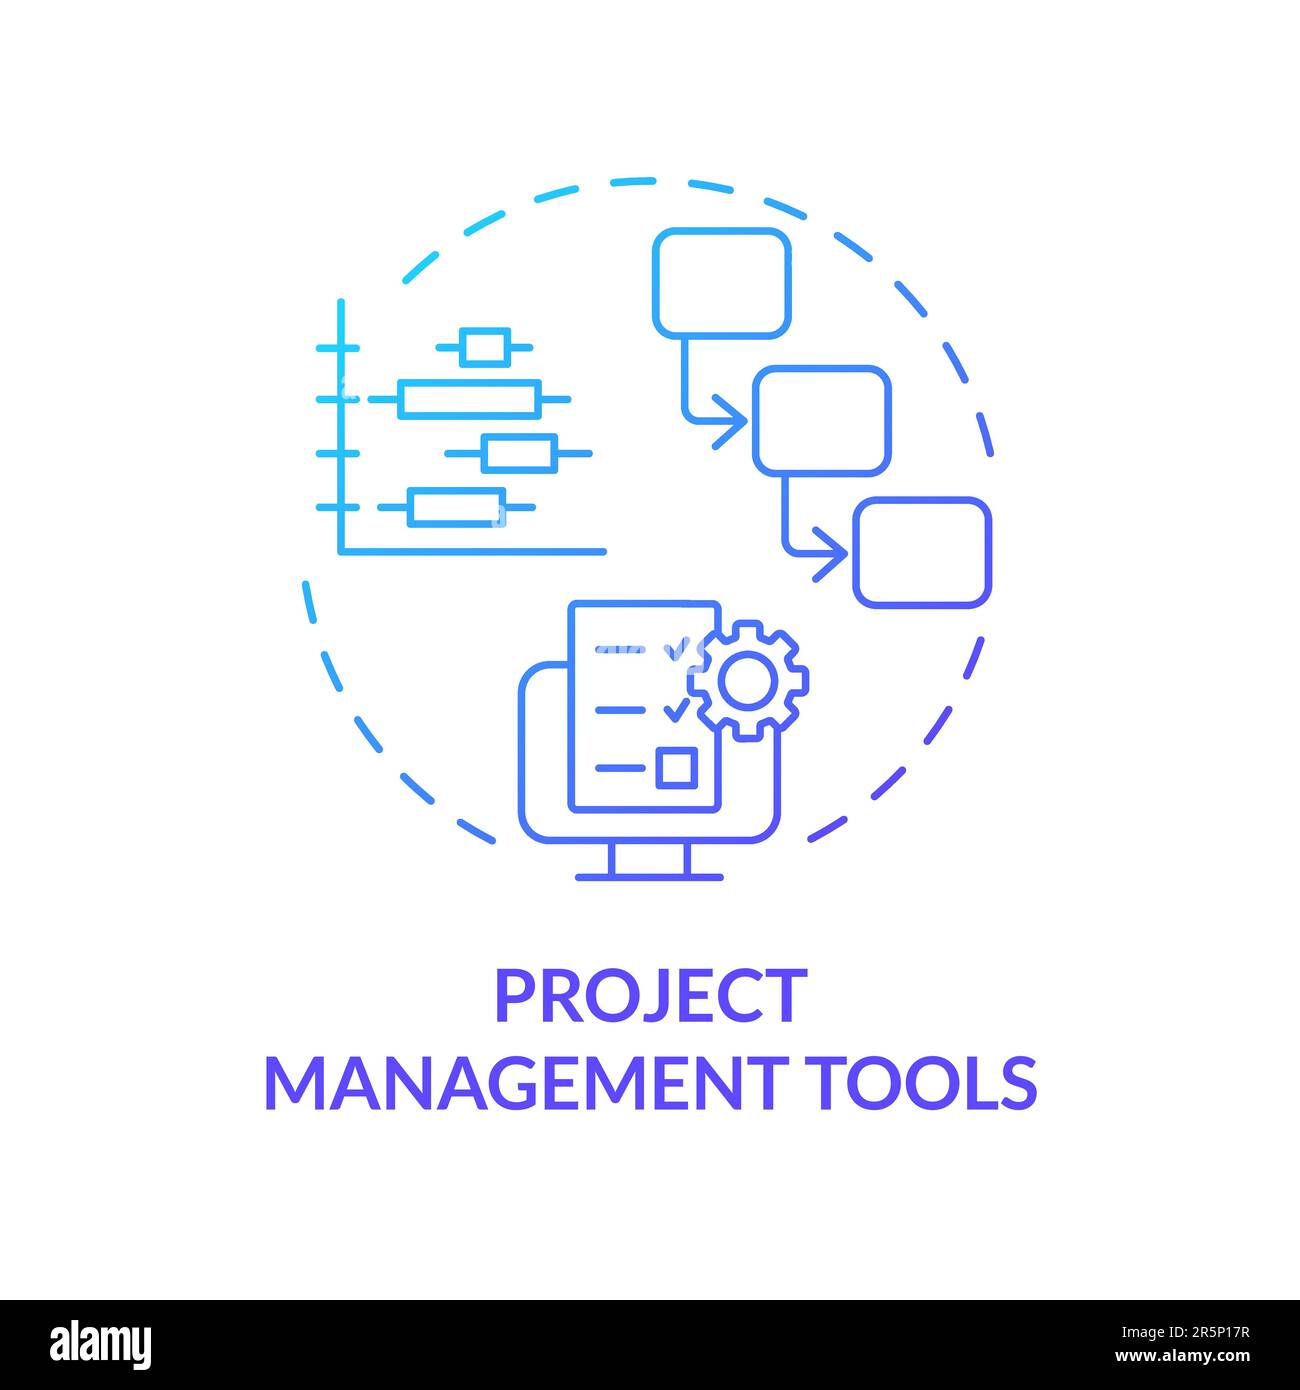 Project management tools blue gradient concept icon Stock Vector